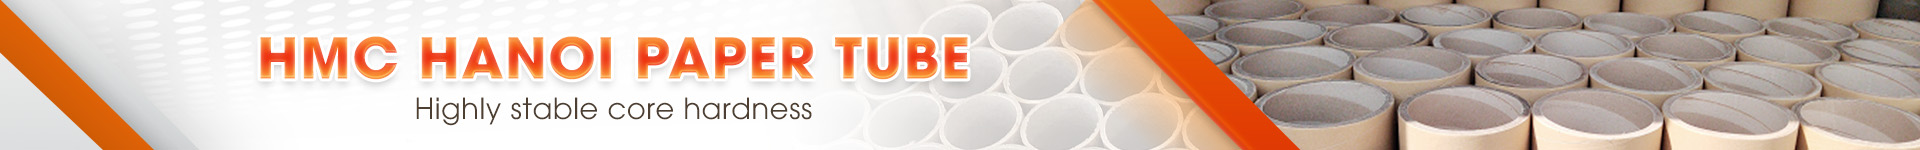 OTHER PAPER TUBES